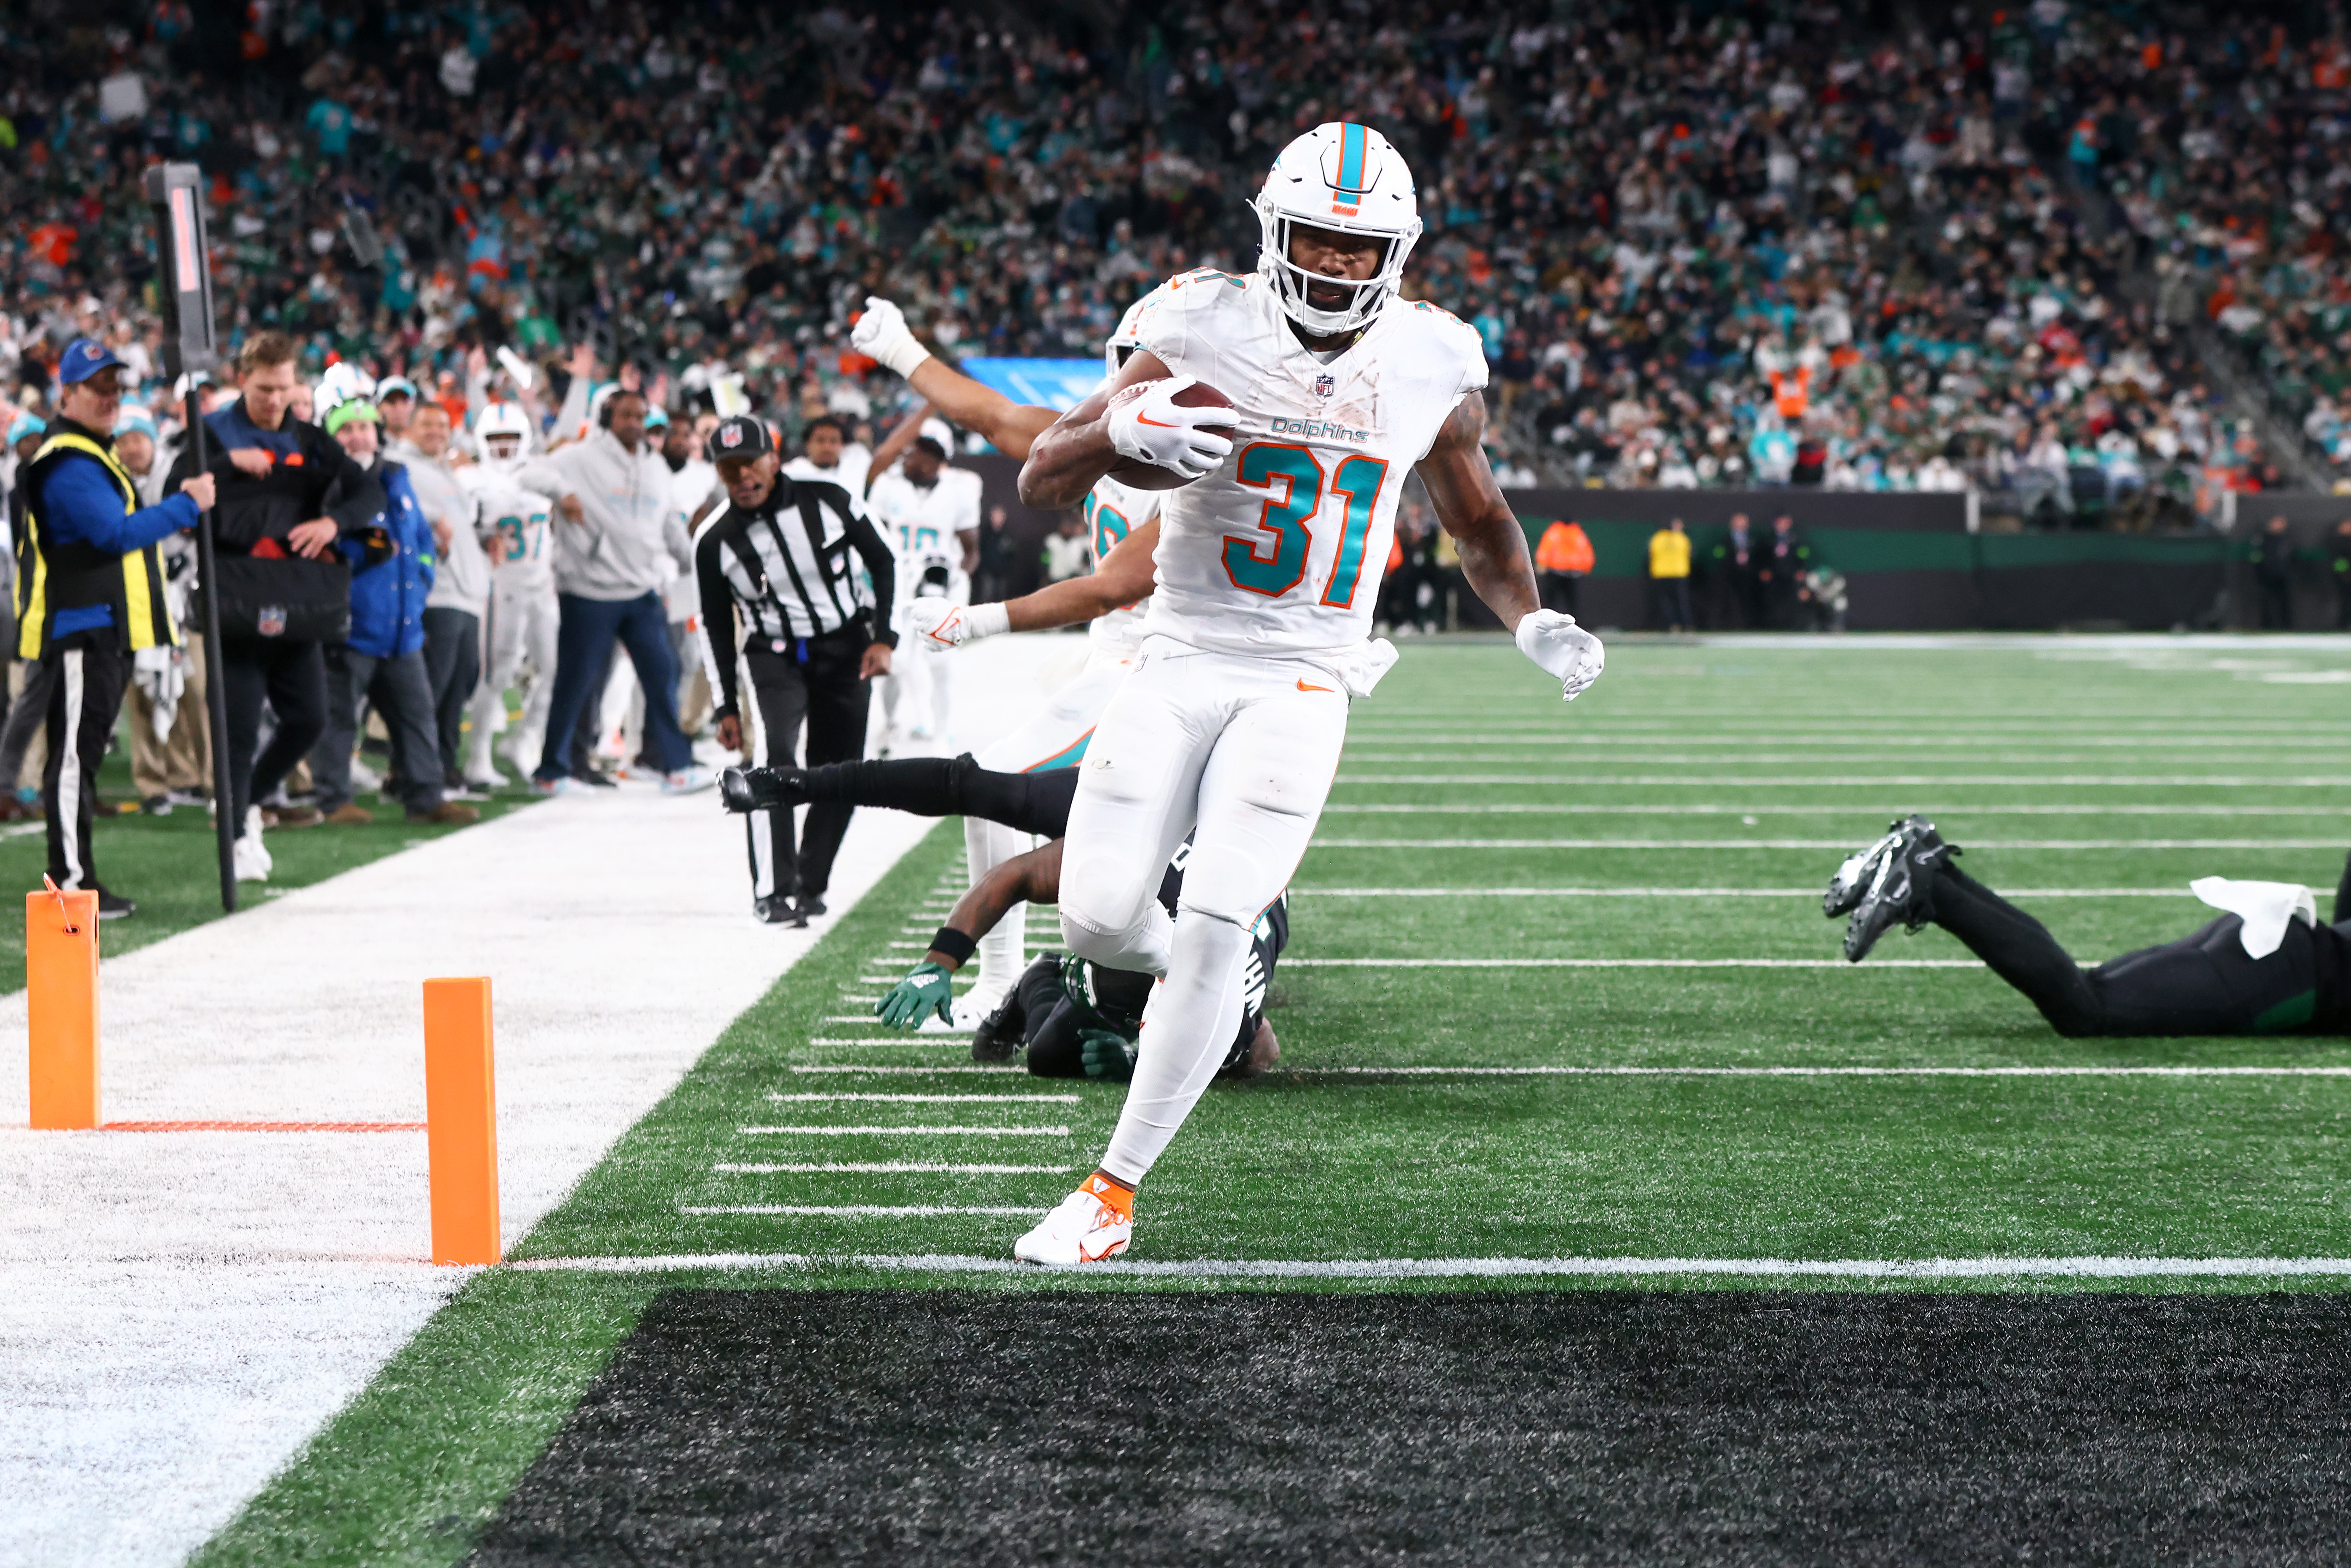 Running back Raheem Mostert of the Miami Dolphins scores a touchdown in the game against the New York Jets at MetLife Stadium in East Rutherford, New Jersey, November 24, 2023. /CFP